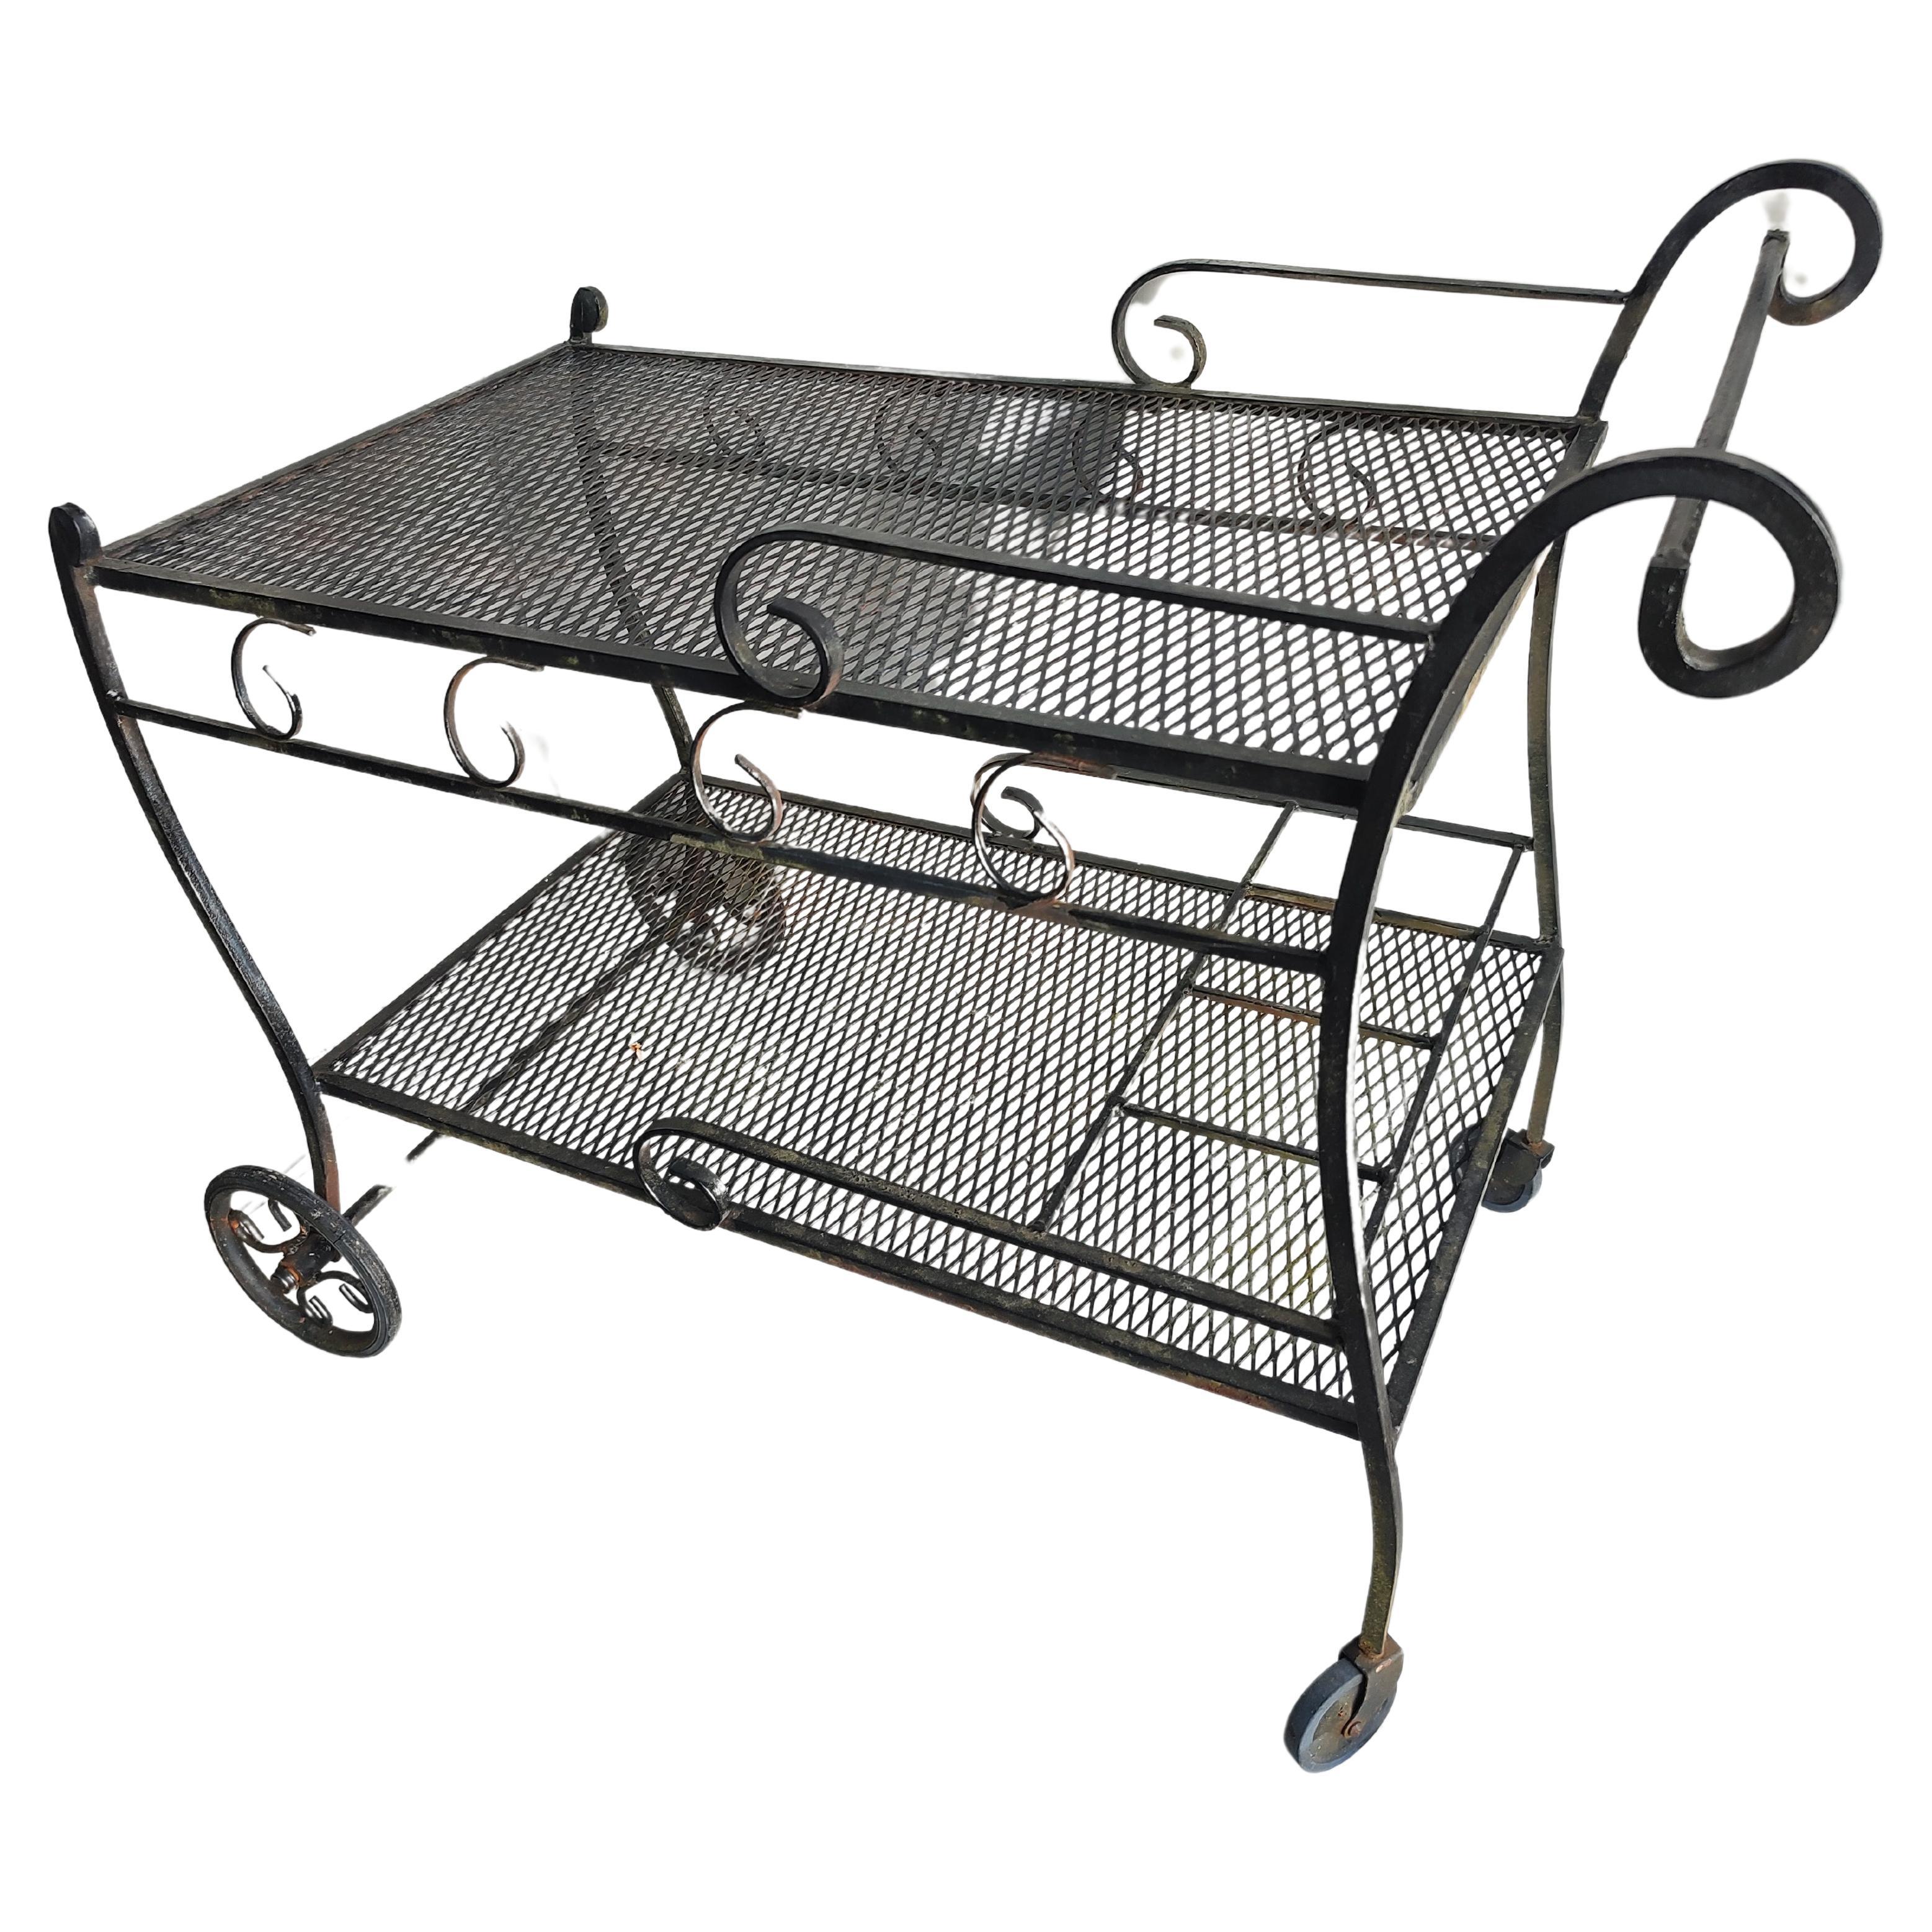 American Mid-Century Modern Wrought Iron Outdoor Bar Cart with Liquor Bottle Holder For Sale